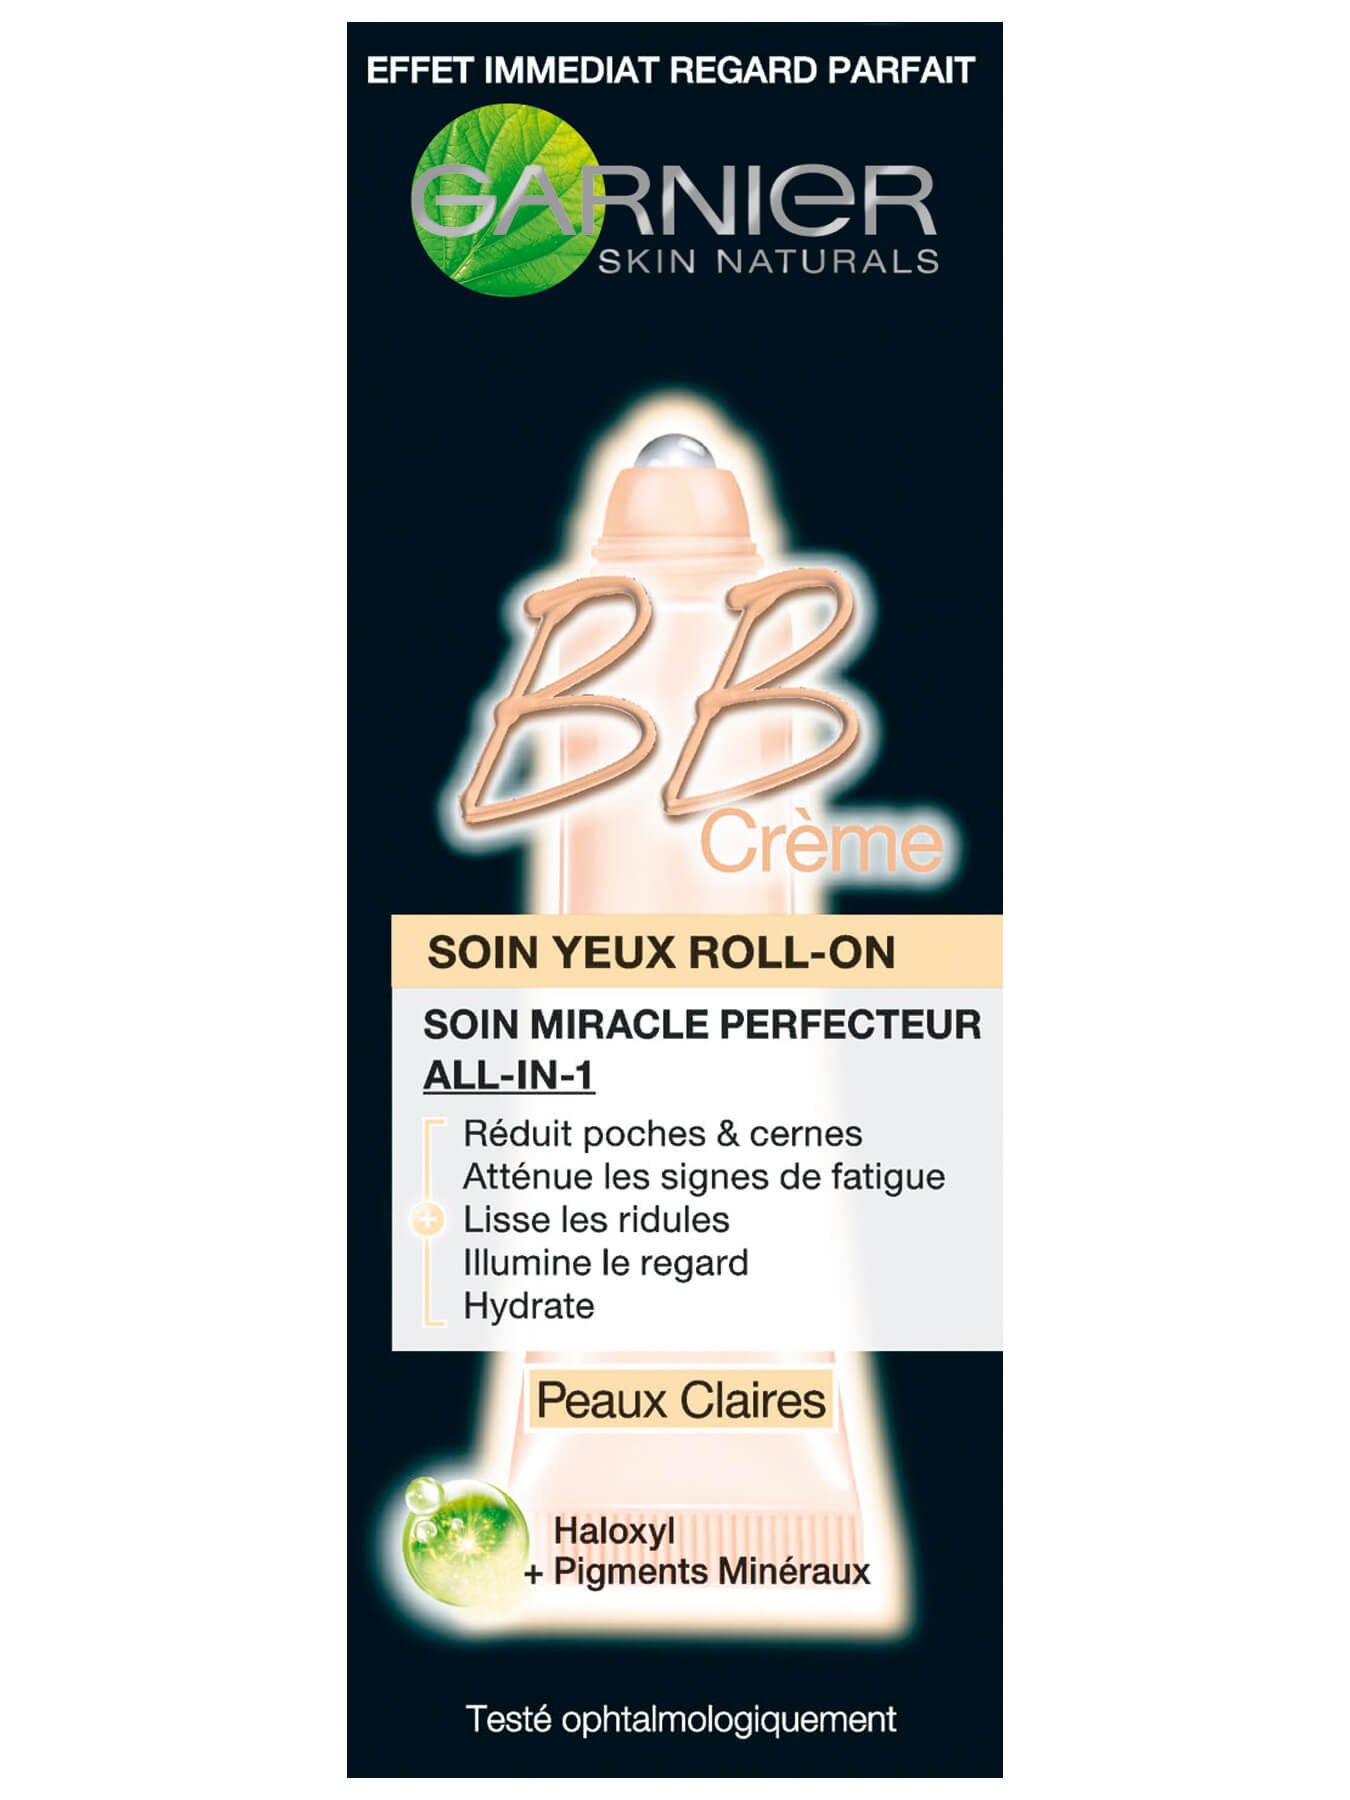 Skin naturals BBcream roller yeux peaux claires FR